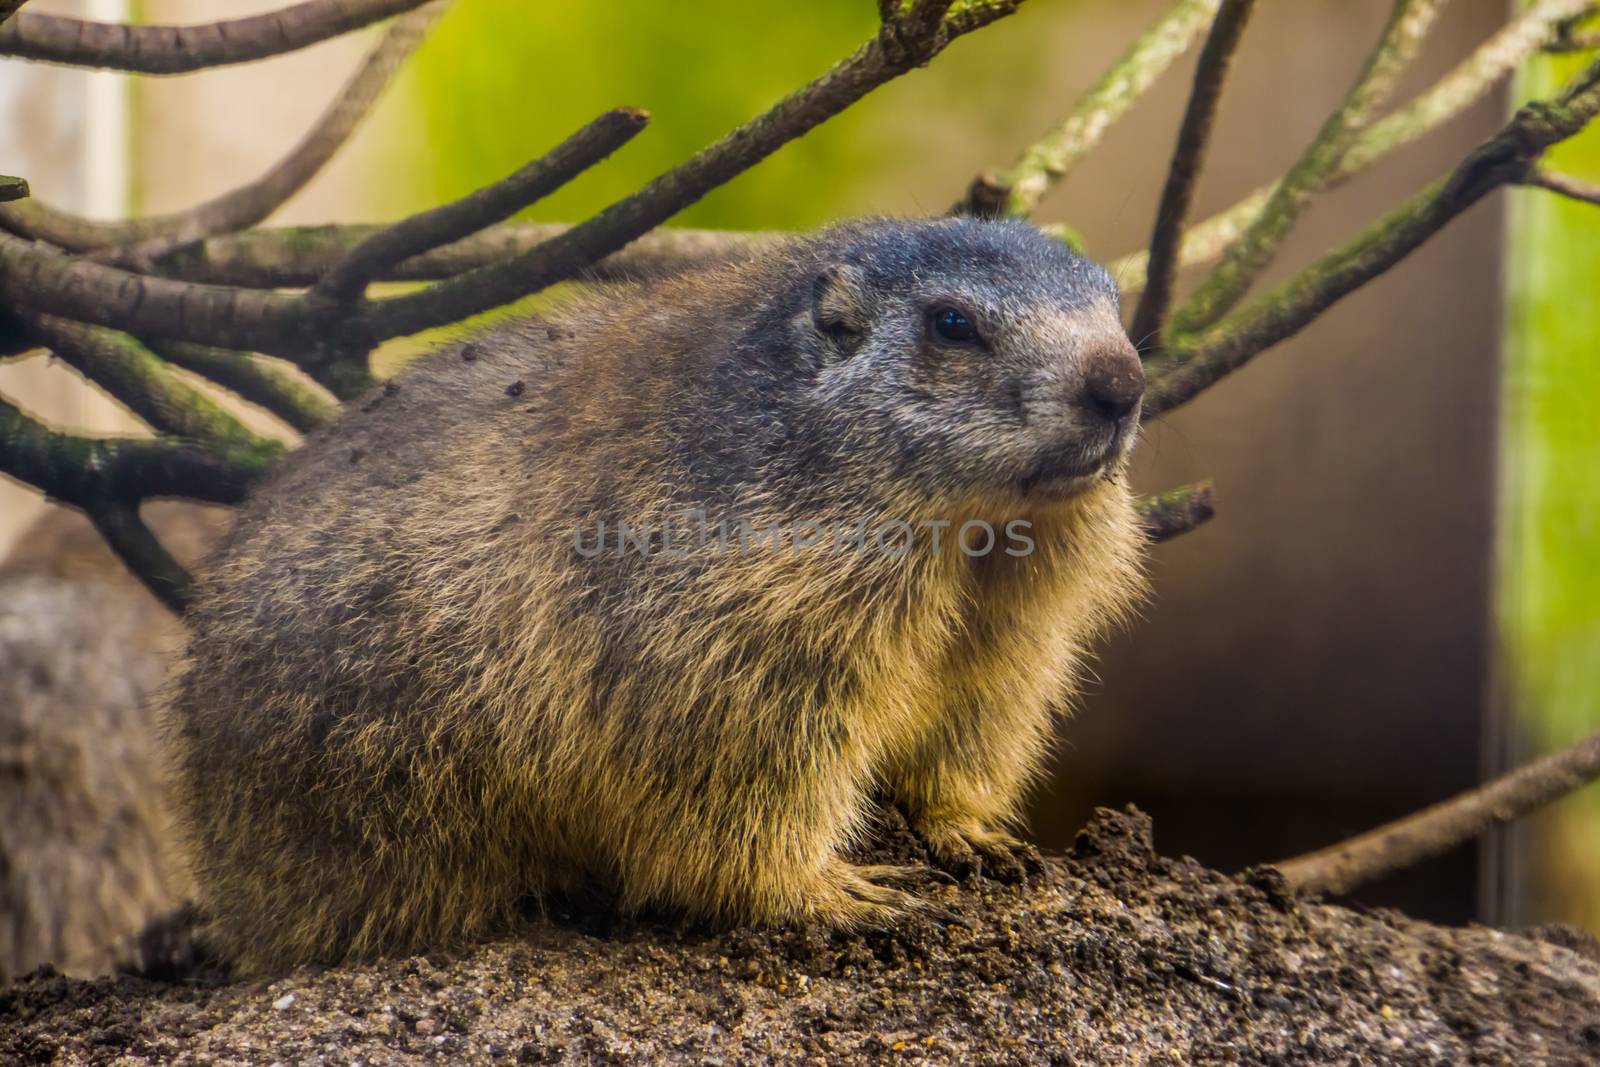 beautiful closeup portrait of an alpine marmot, Wild squirrel specie from the Alps of europe